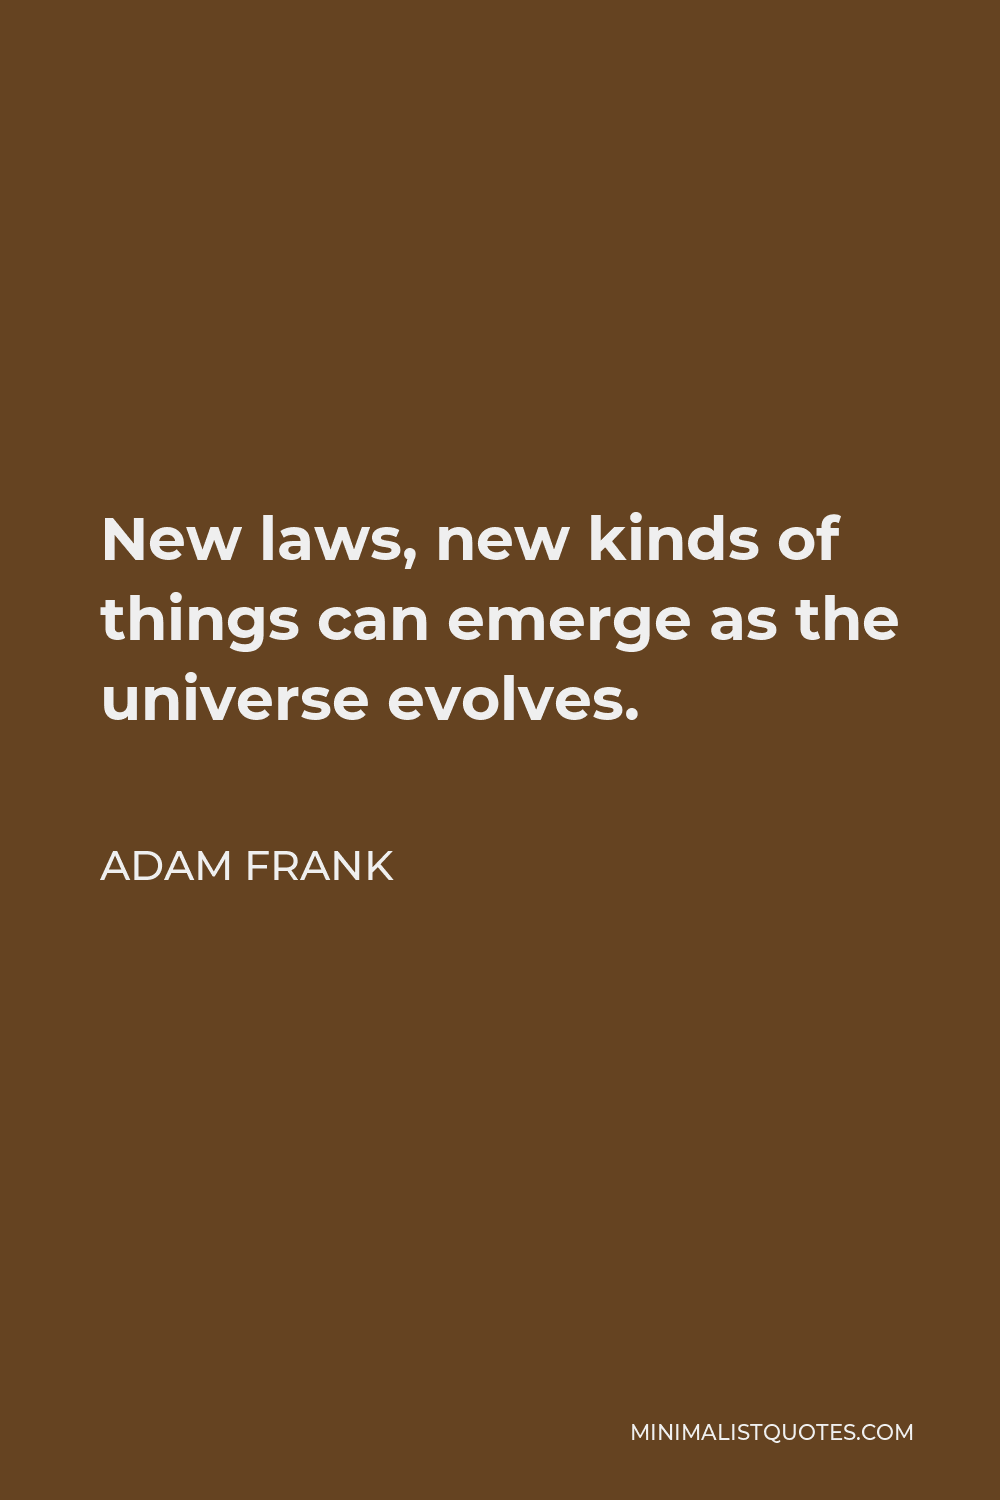 Adam Frank Quote - New laws, new kinds of things can emerge as the universe evolves.